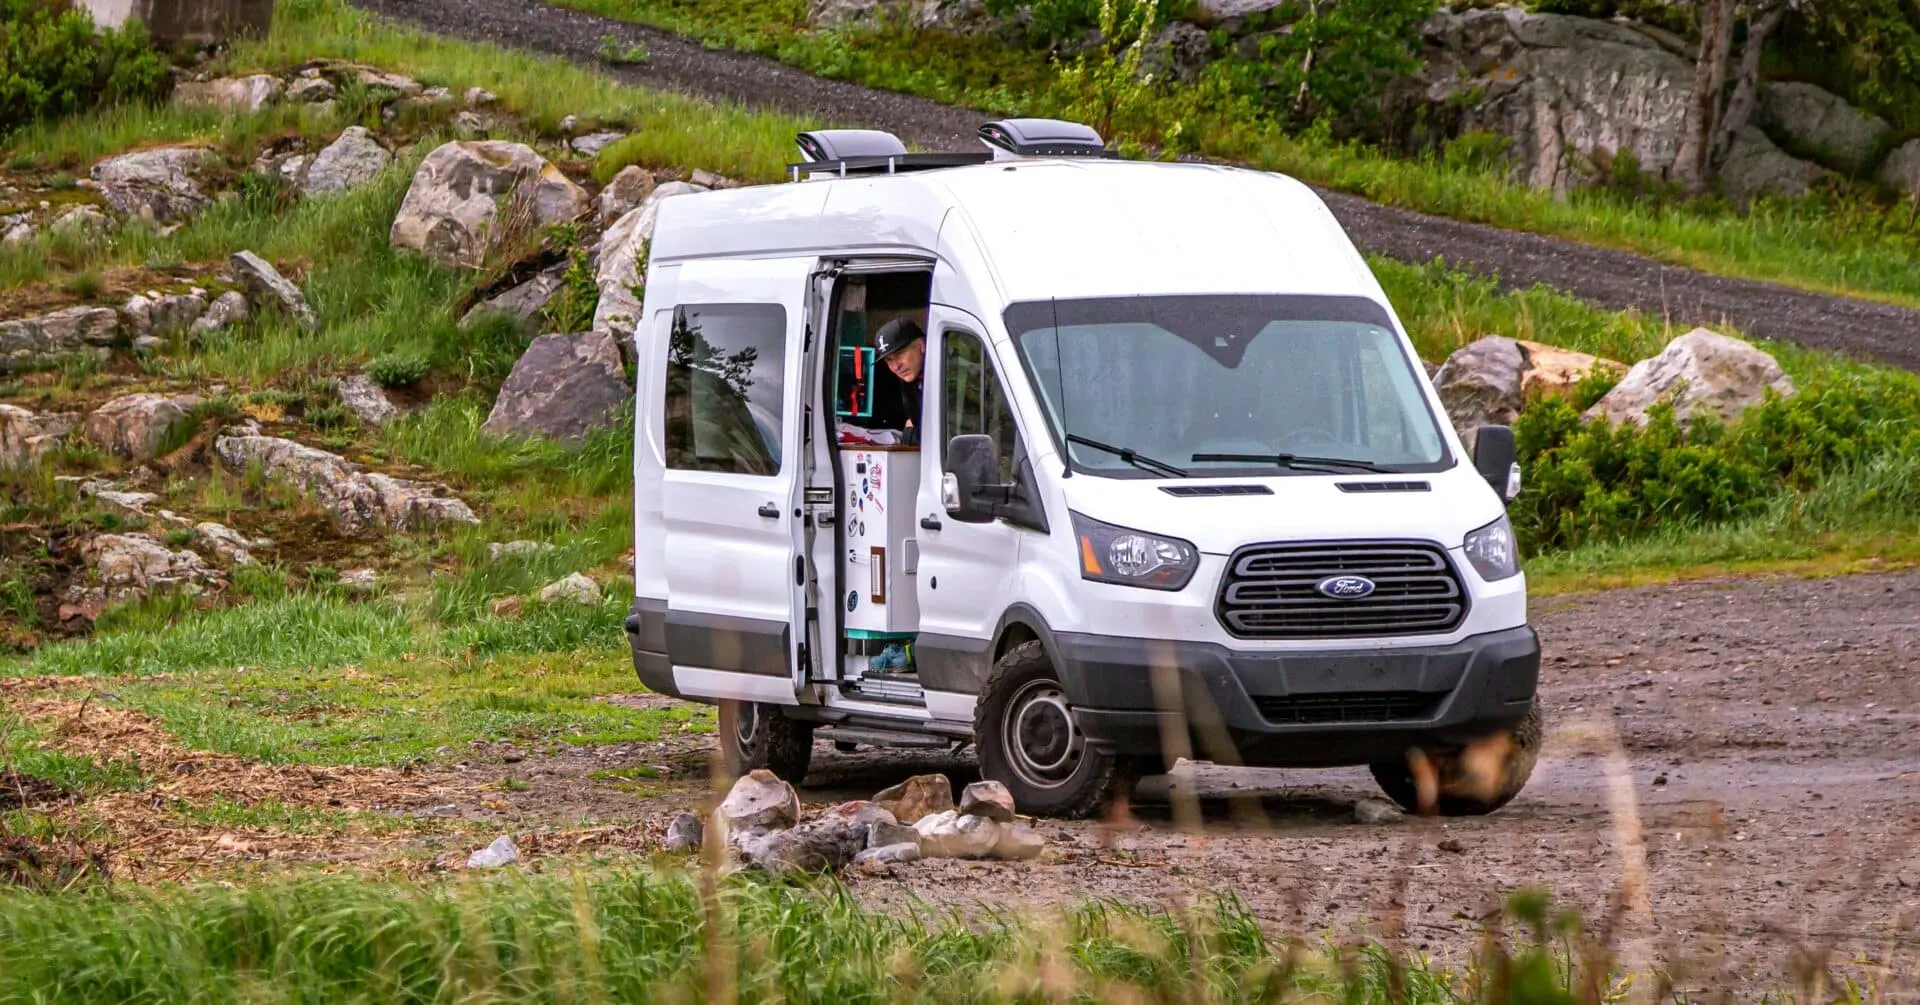 Motorhome insurance costs are lowest for Class B RVs.